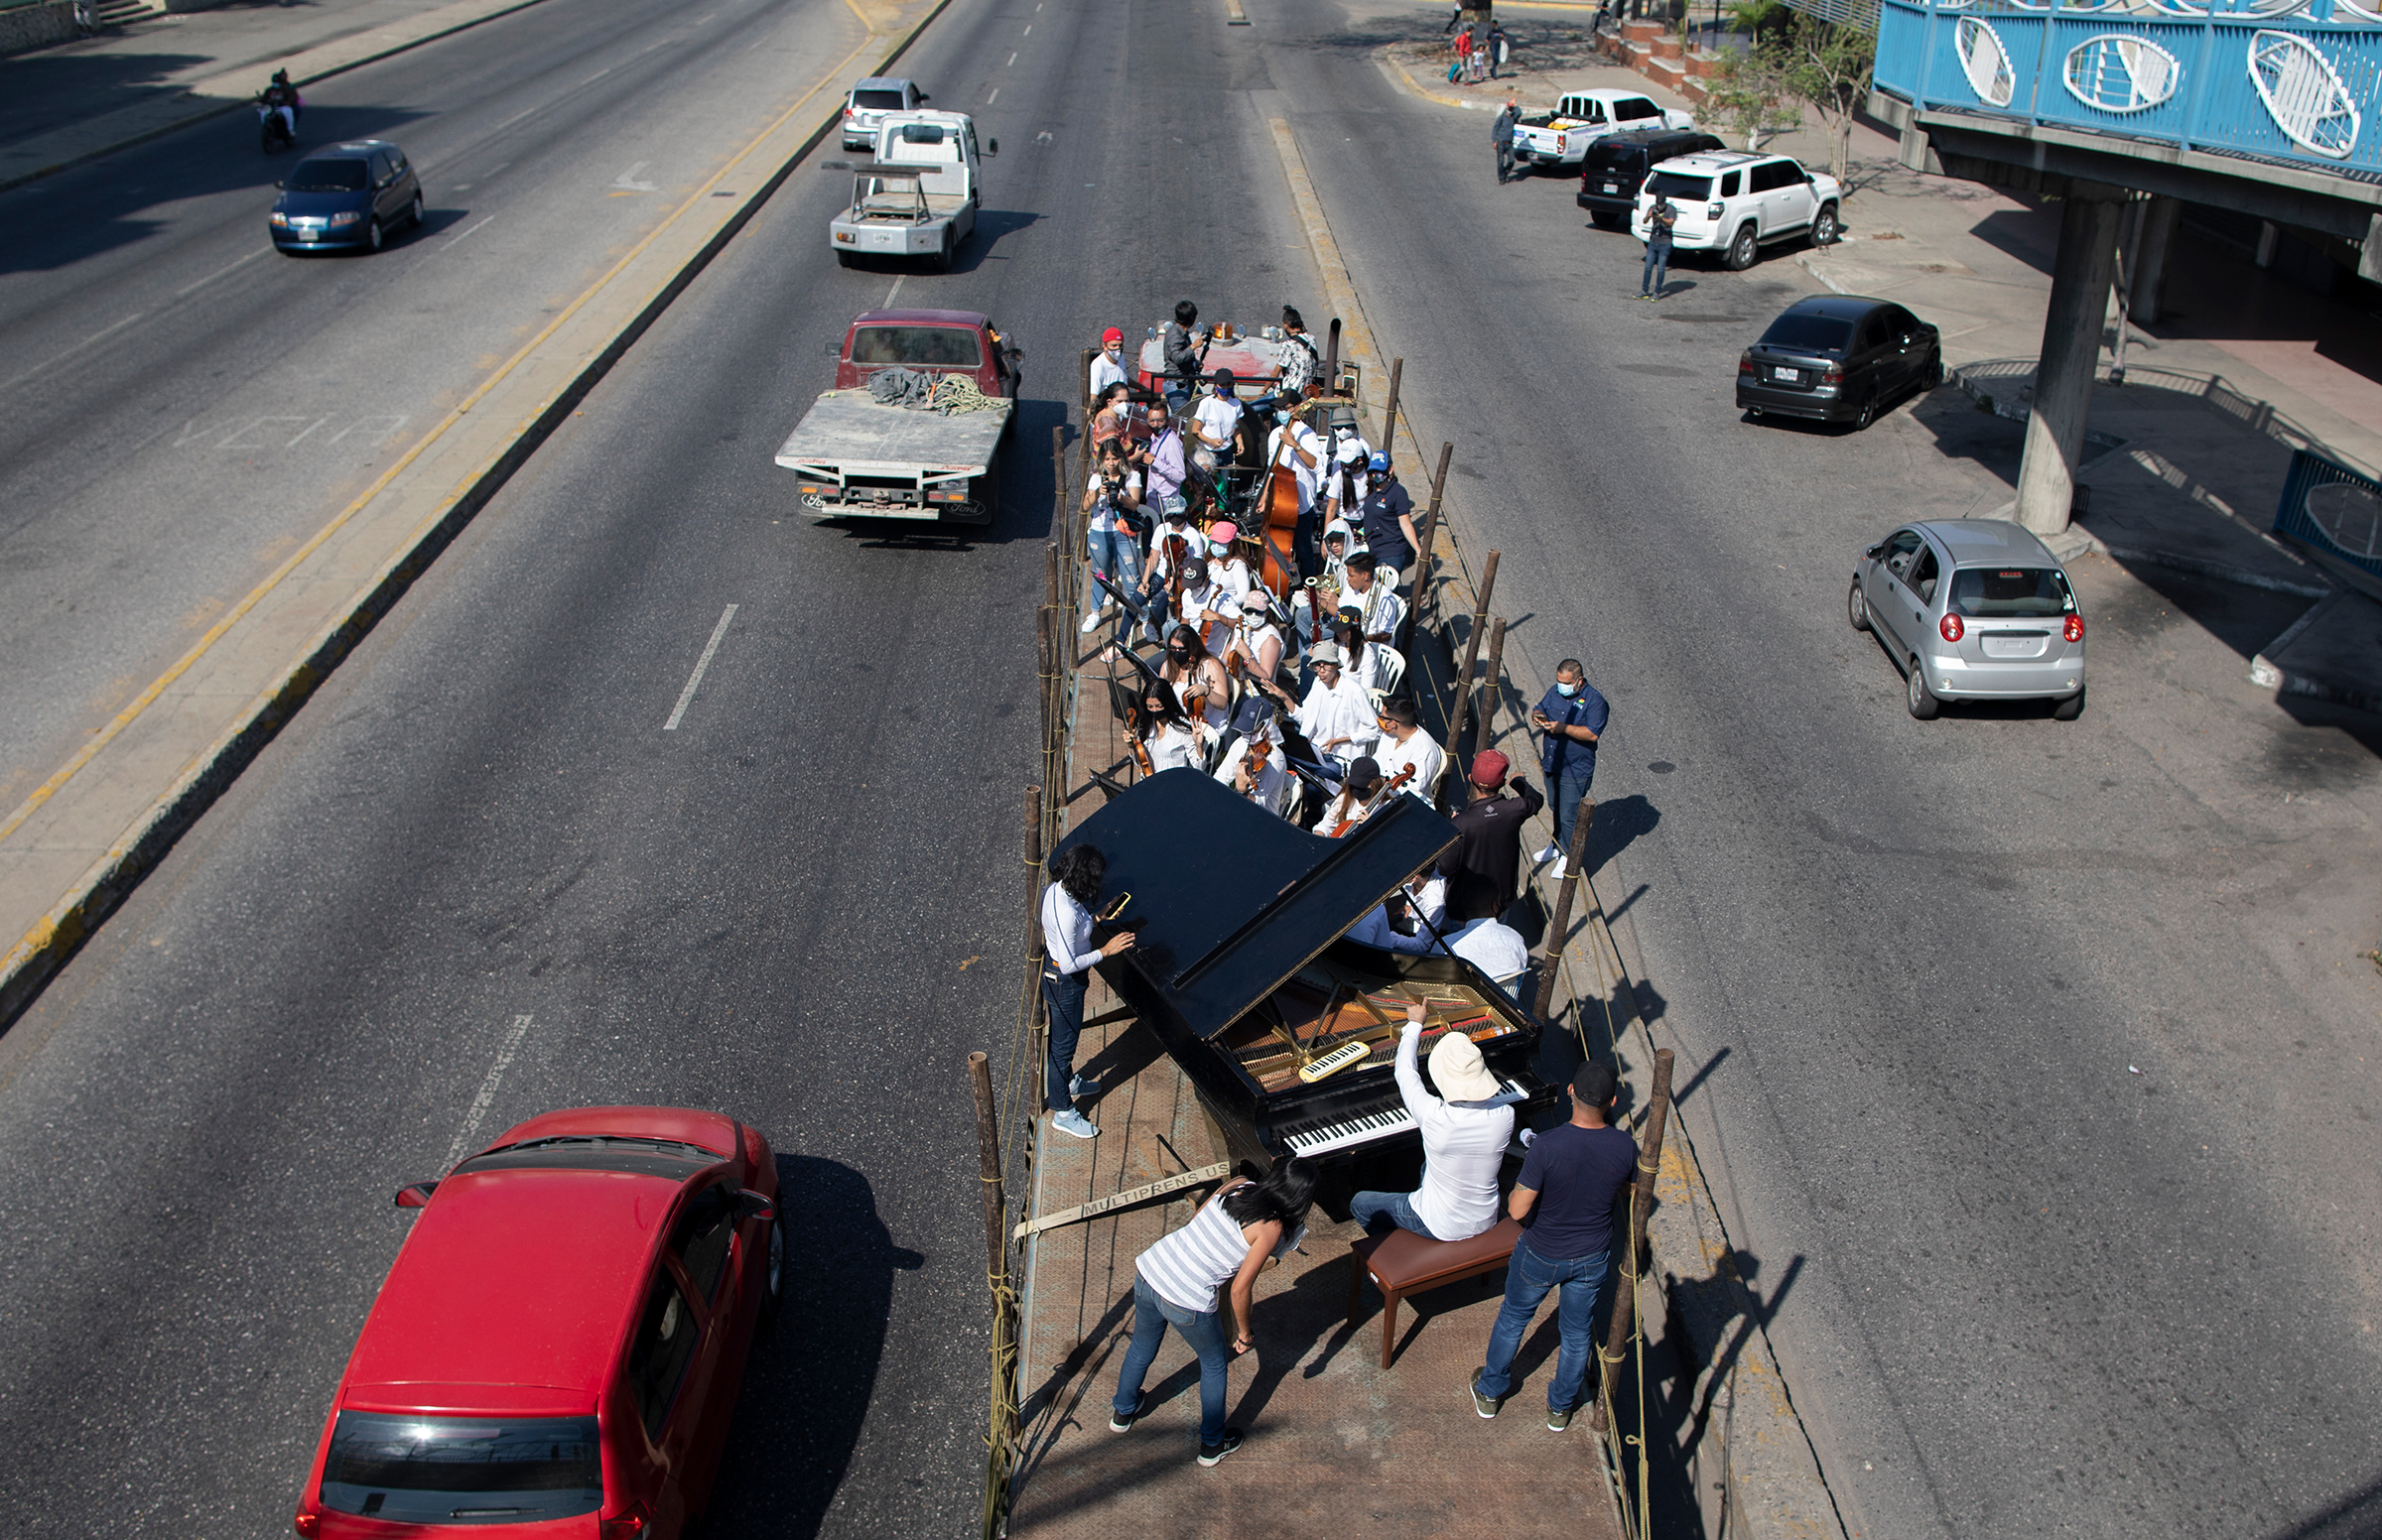 Musicians join pianist, composer and conductor José Agustín Sánchez on a truck bed for a "musical disinfection" in Barquisimeto, northwestern Venezuela, on March 4. Sanchez, who last year started playing what he calls his "Musical Vaccine" for COVID-19 patients, is now accompanied by other musicians as they ride through the city playing his original compositions for anybody who wants to listen. (Ariana Cubillos—AP)